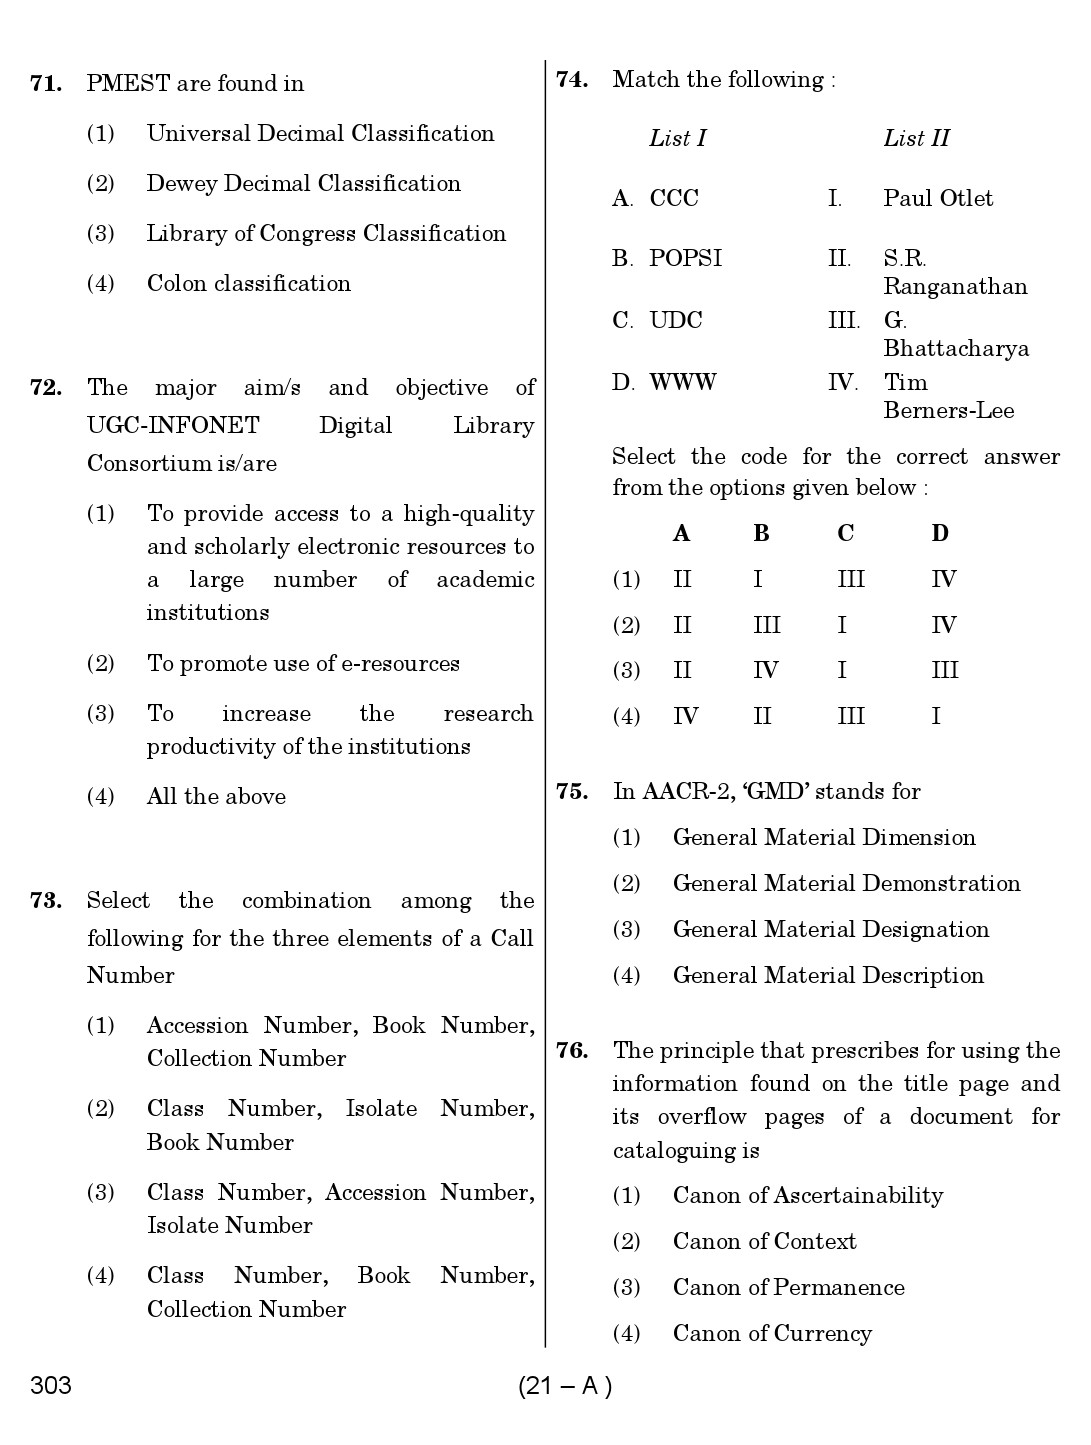 Karnataka PSC 303 Specific Paper II Librarian Exam Sample Question Paper 21